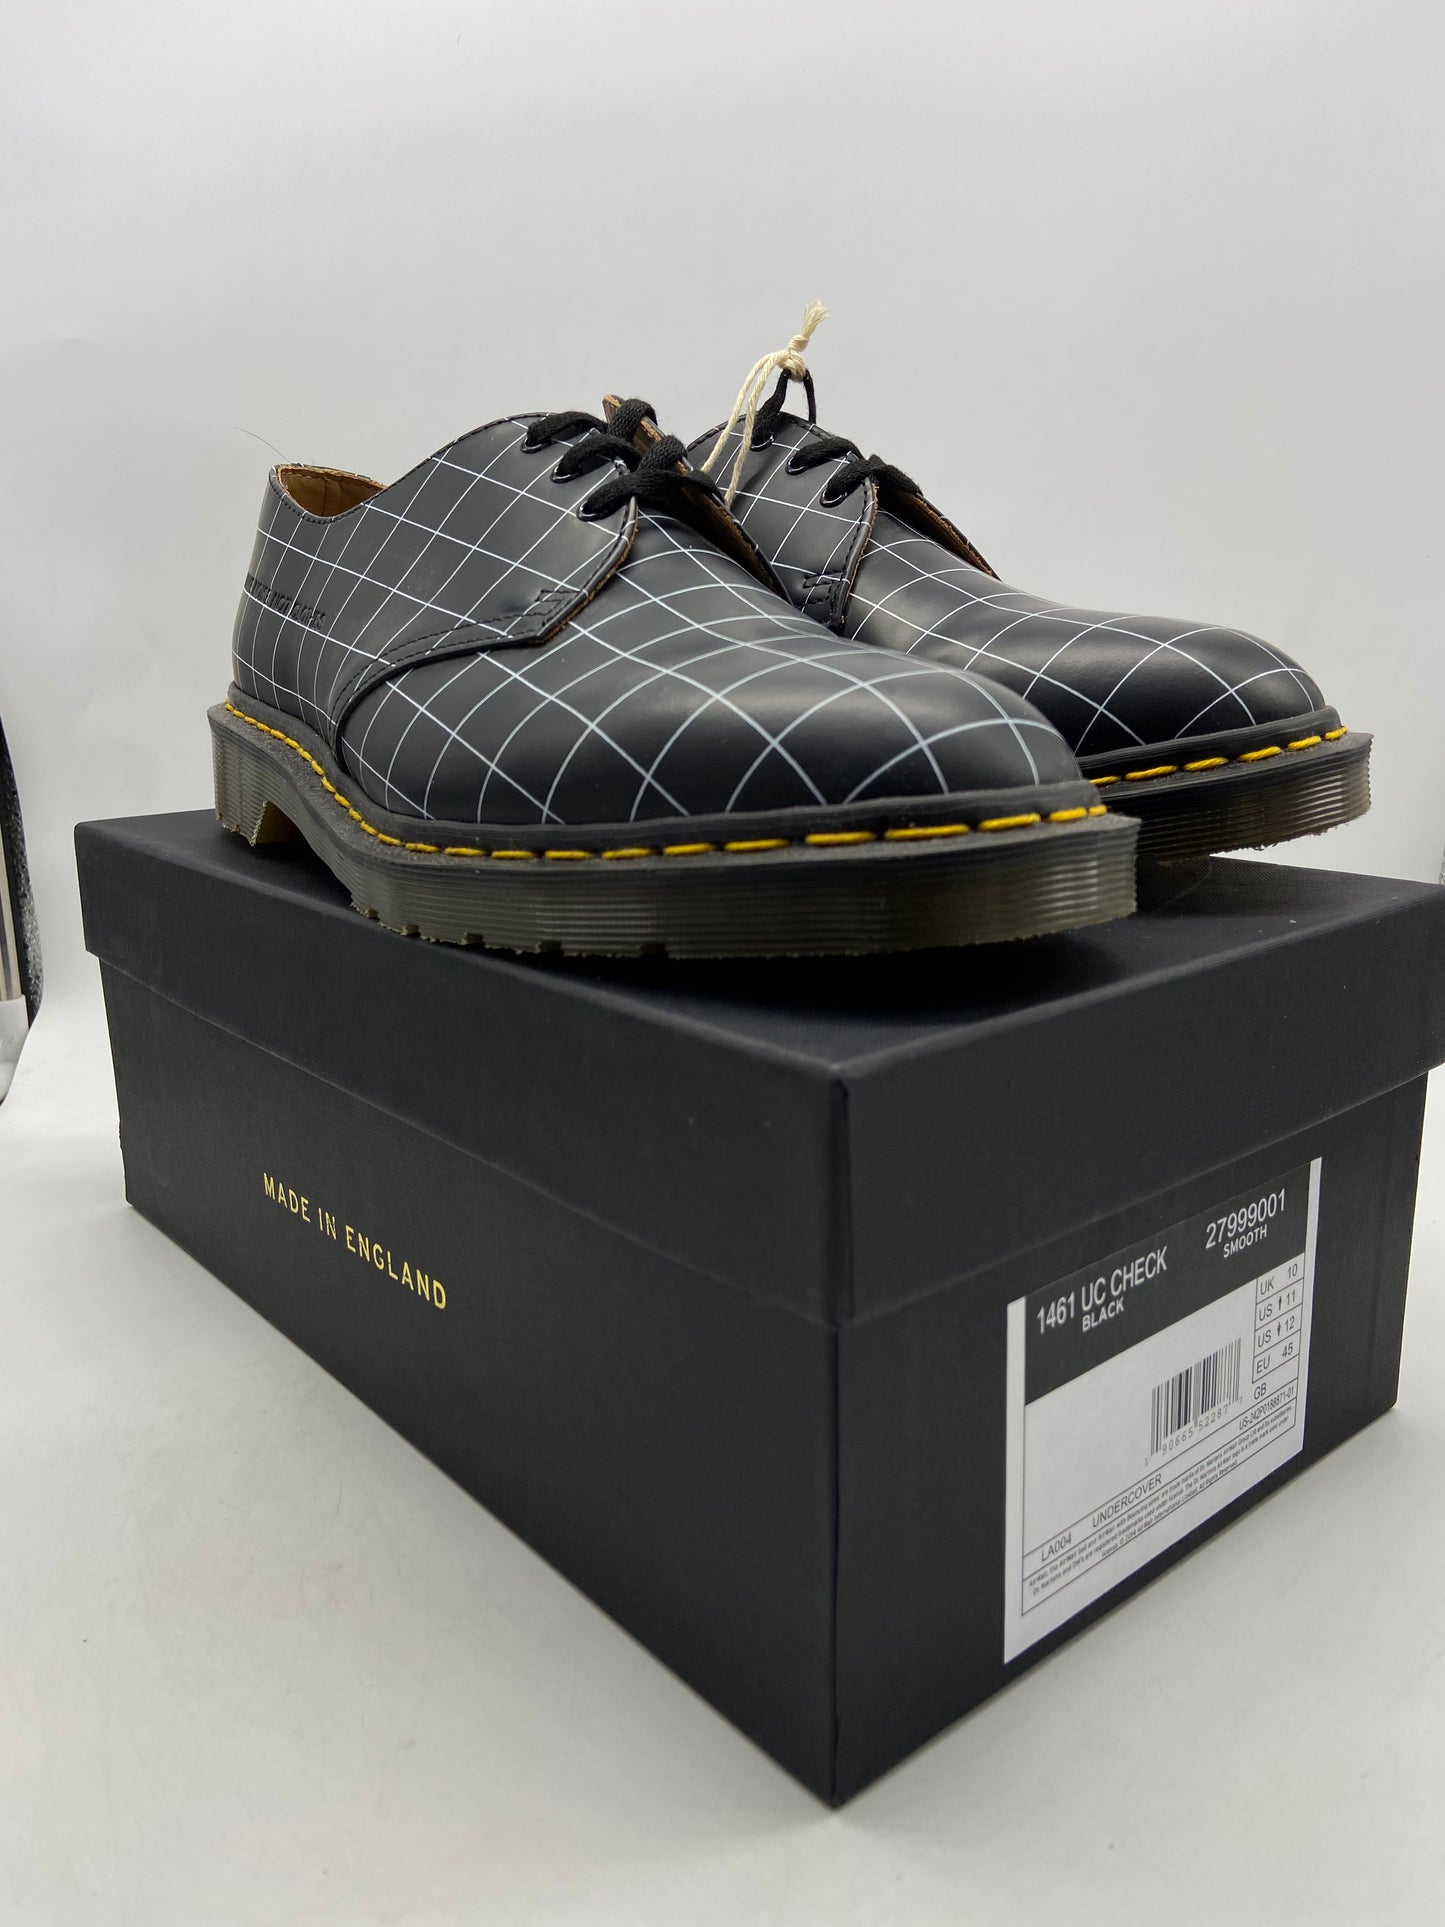 Preowned DR. MARTENS X UNDERCOVER Black 1461 CHECK SMOOTH  Sz 11M/12.5W